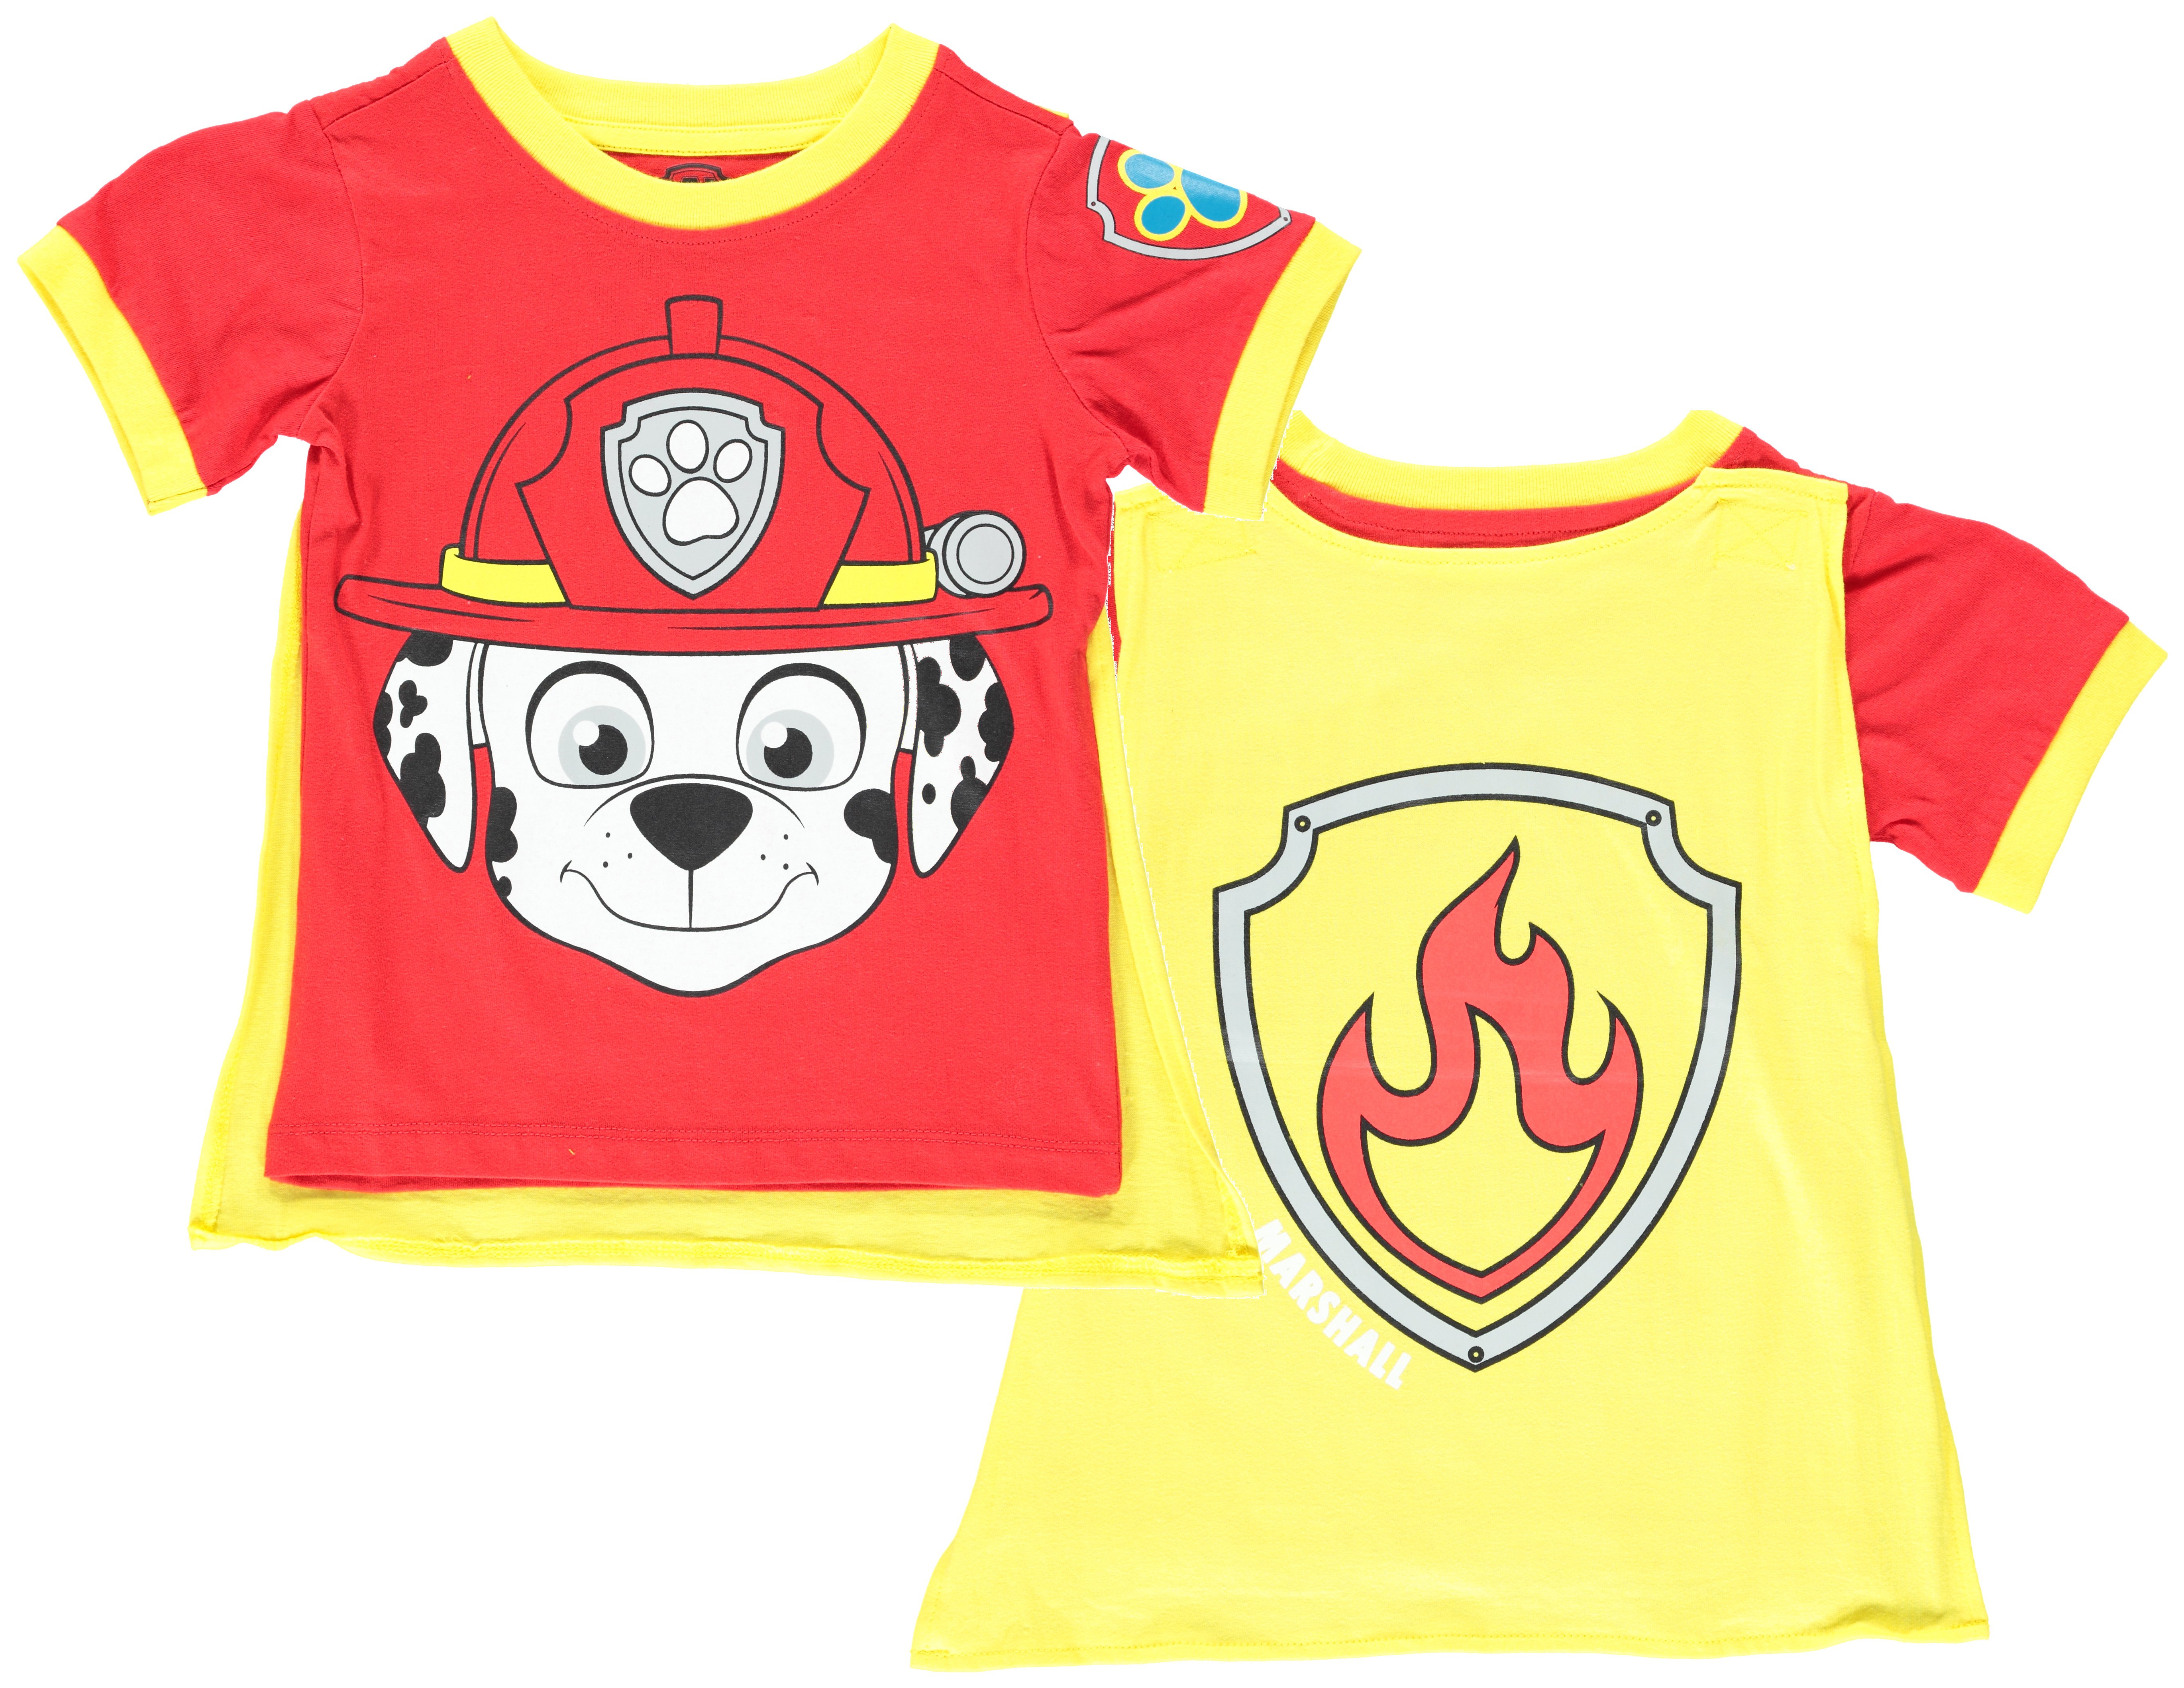 Nickelodeon Paw Patrol Ringer T-Shirt with Cape - Chase, Skye | eBay